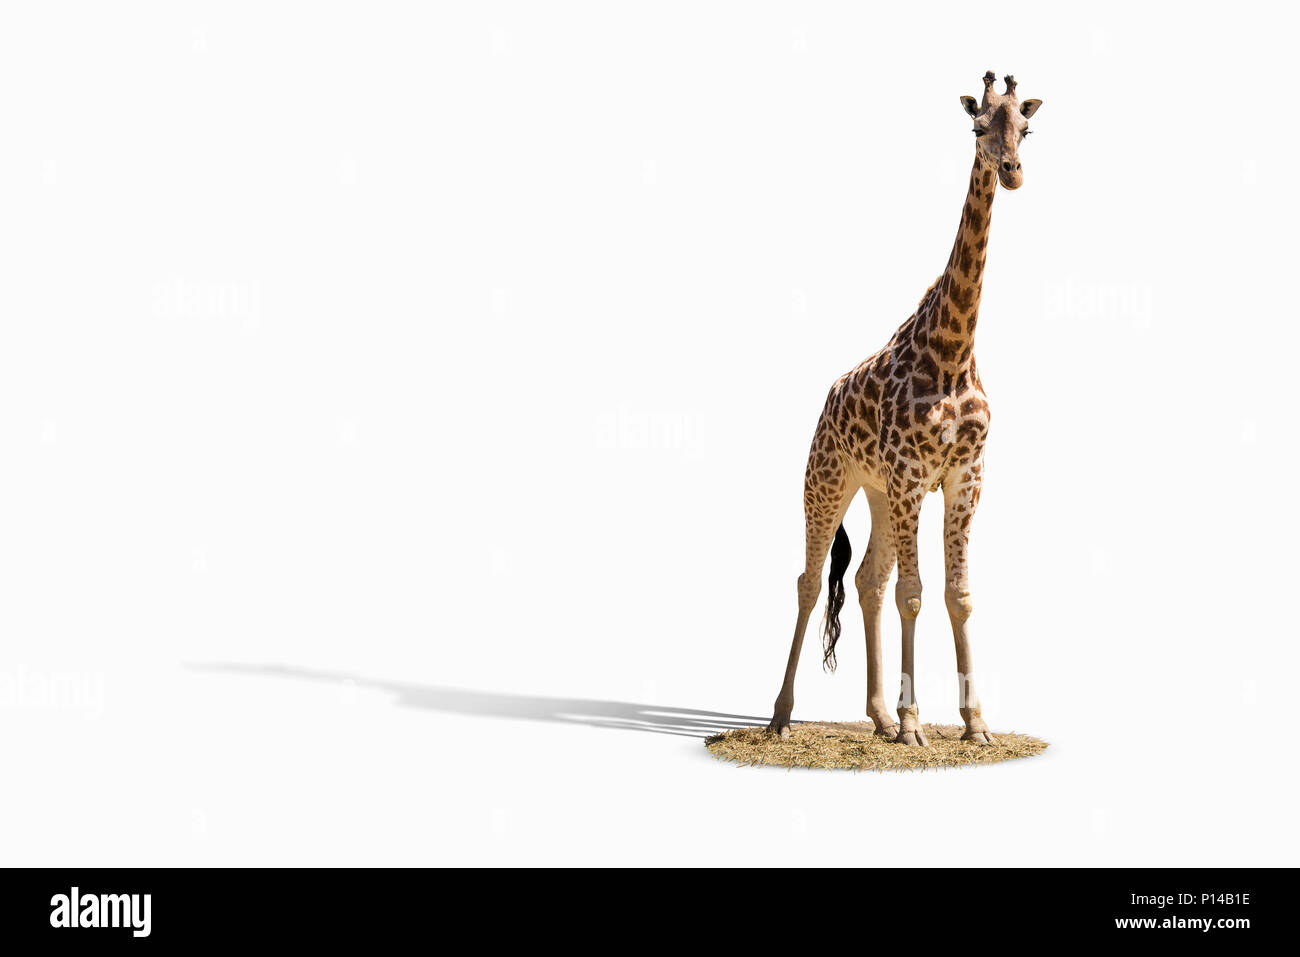 Giraffe standing on a wite background with shadow and savannah ground. Stock Photo